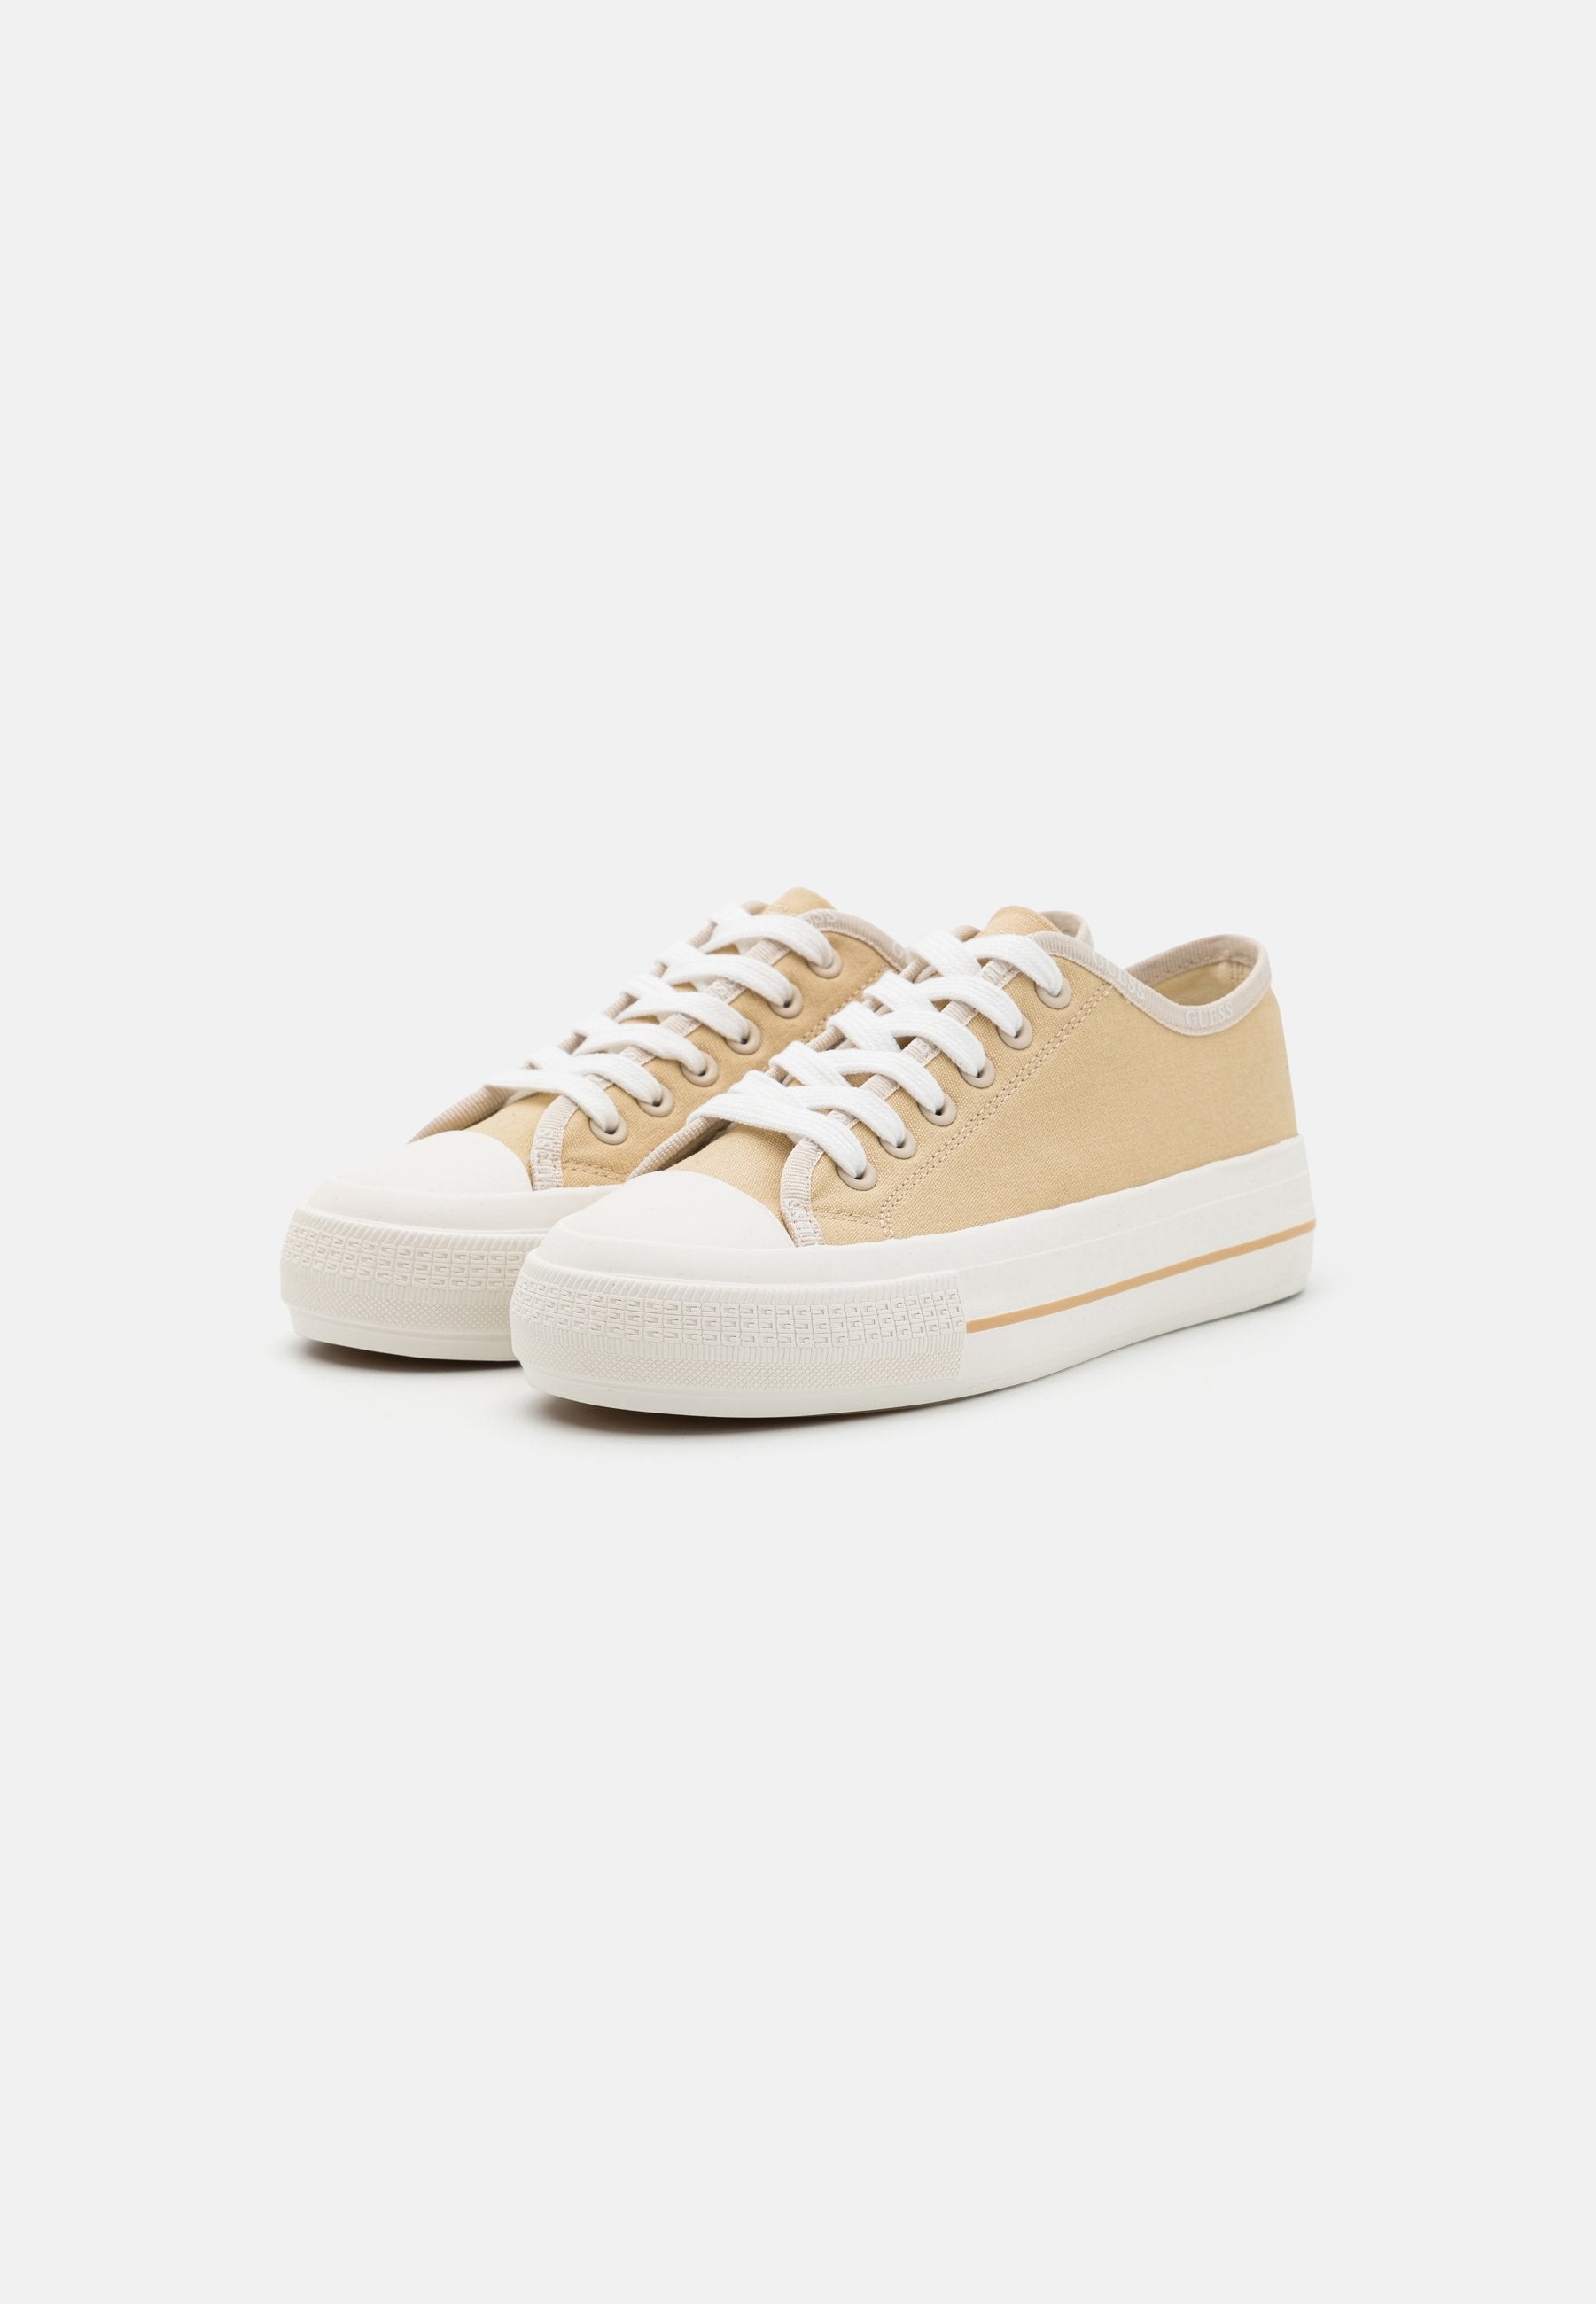 GUESS Emma Canvas Trainer Beige